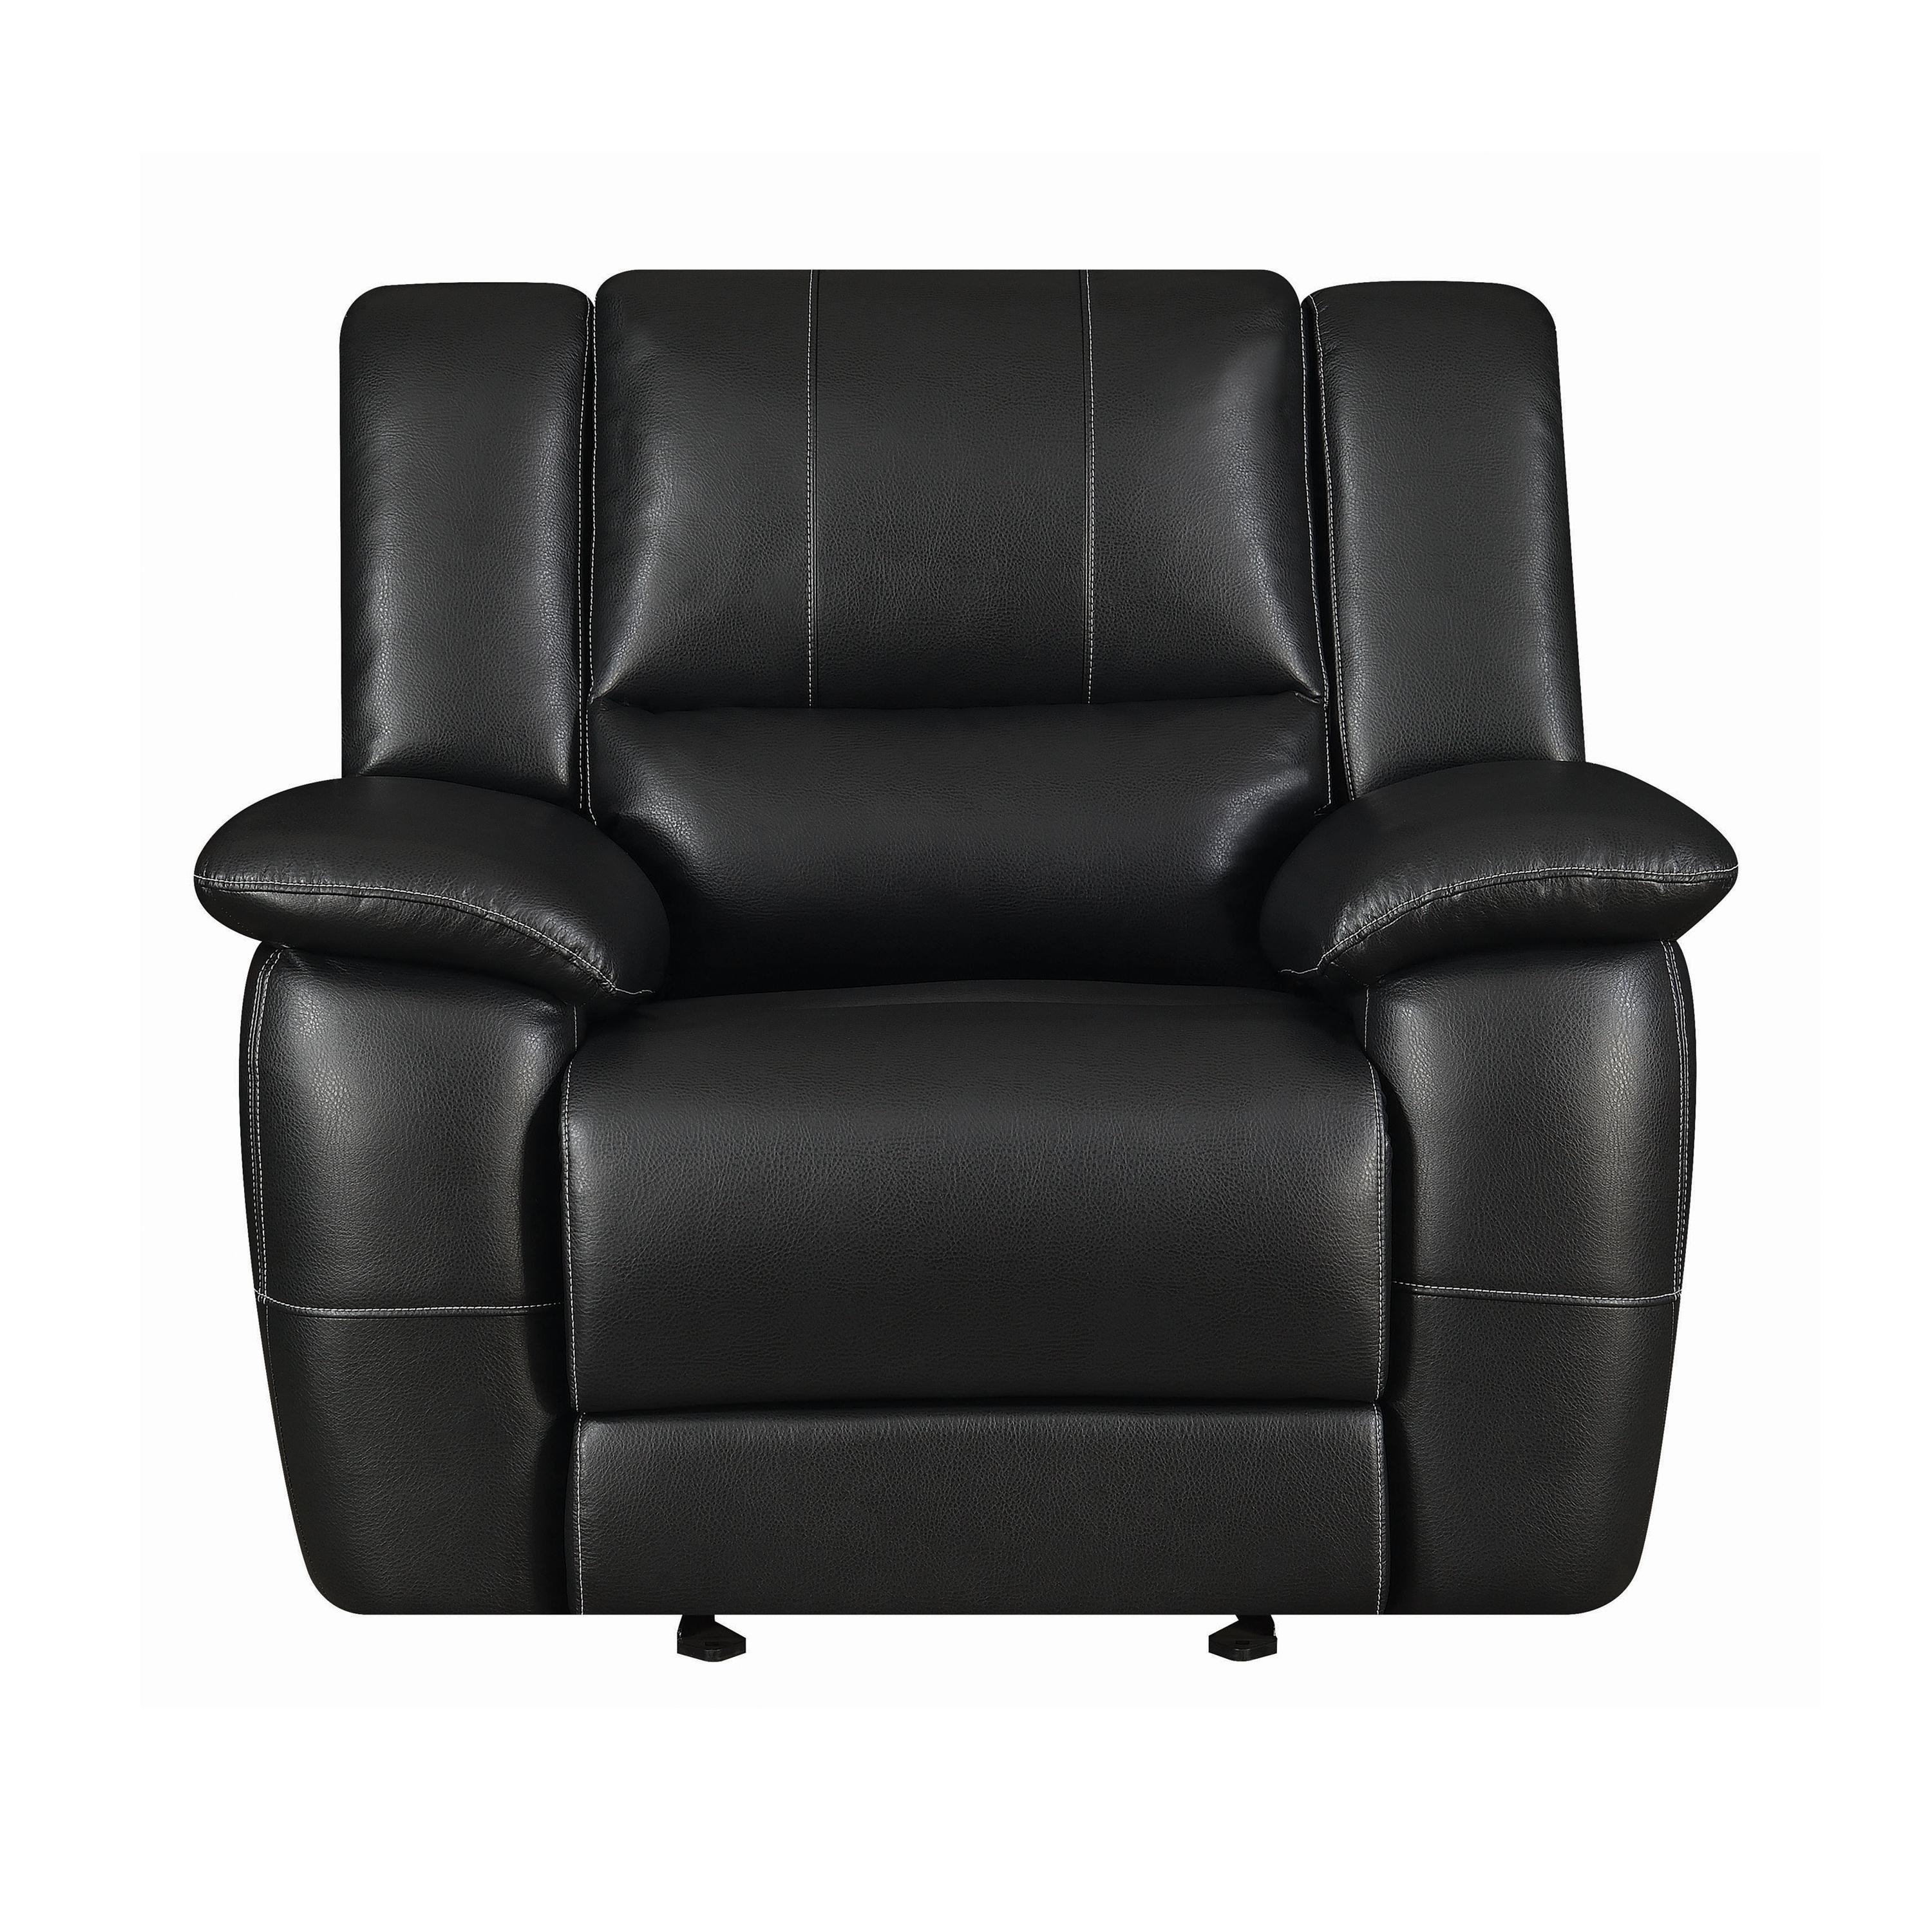 

    
Contemporary Black Faux Leather Glider Recliner Coaster 601063 Lee
